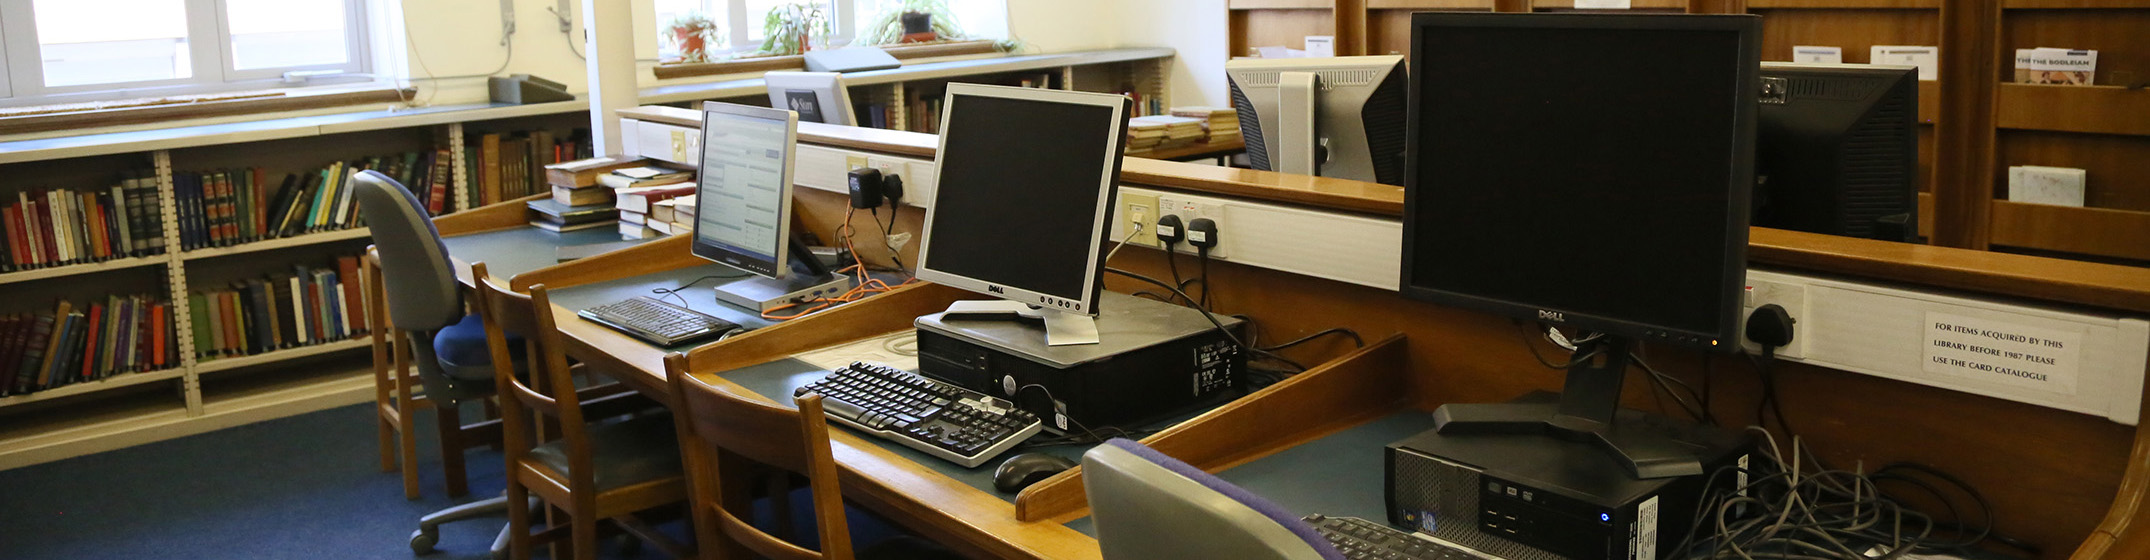 A row of three desktop computers on a wooden desk